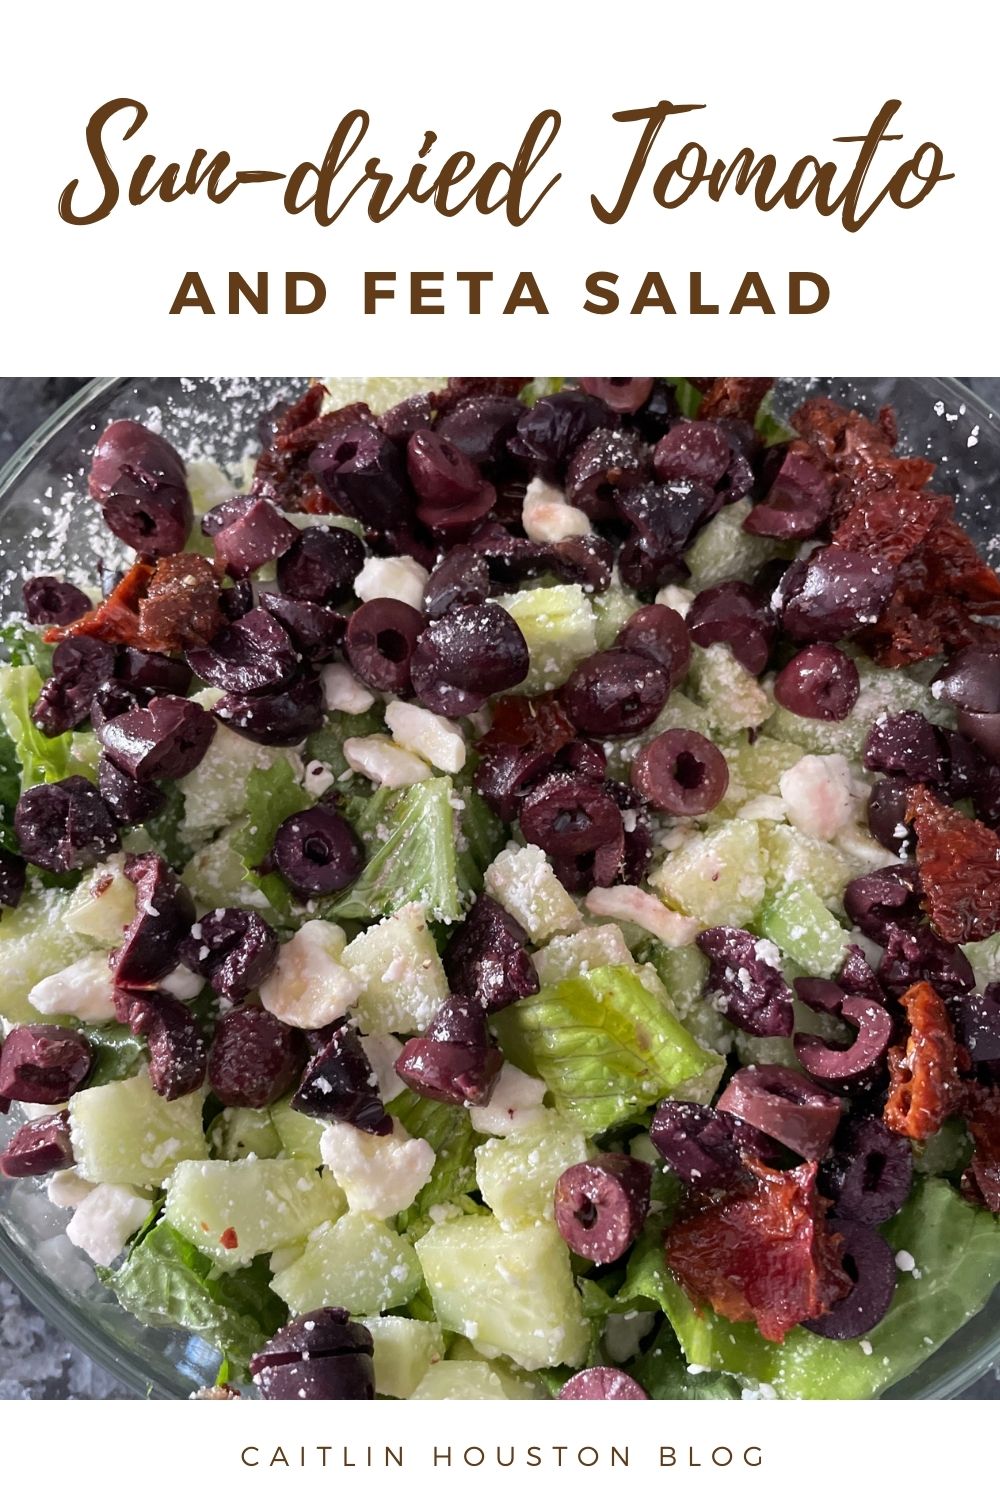 Sun-dried Tomato and Feta Salad with Cucumbers and Romaine Lettuce 